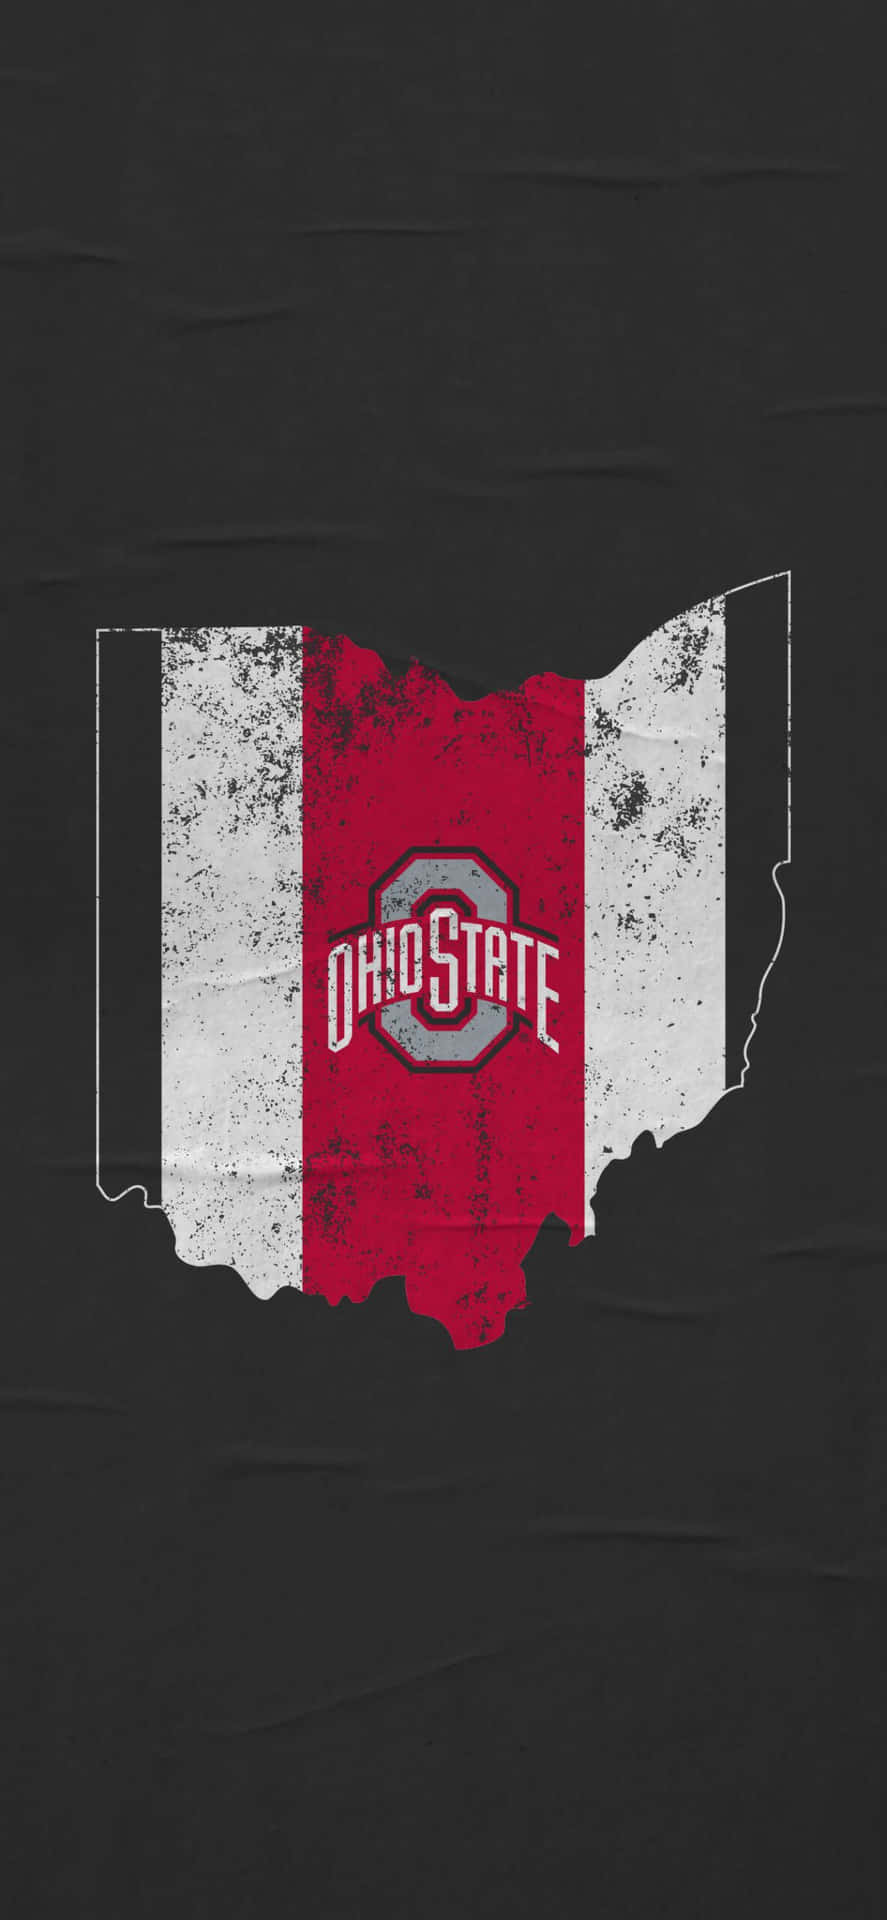 Download this beautiful Ohio State University Iphone wallpaper to show your Buckeye pride! Wallpaper